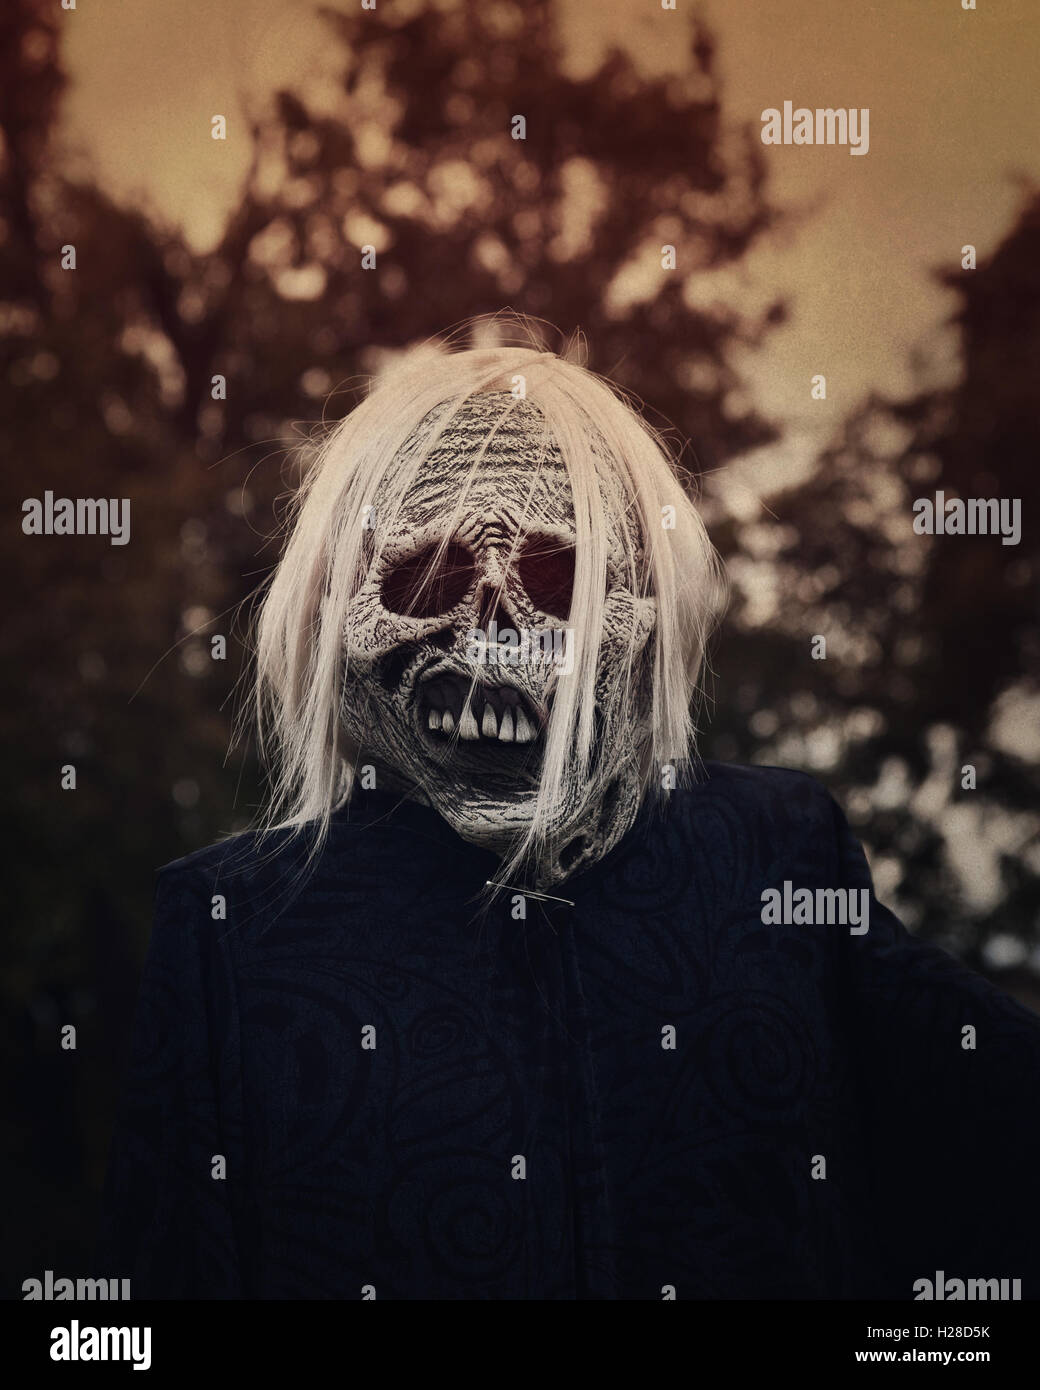 A white scary ghost zombie is outside at night with trees in the background for a decoration or halloween concept. Stock Photo